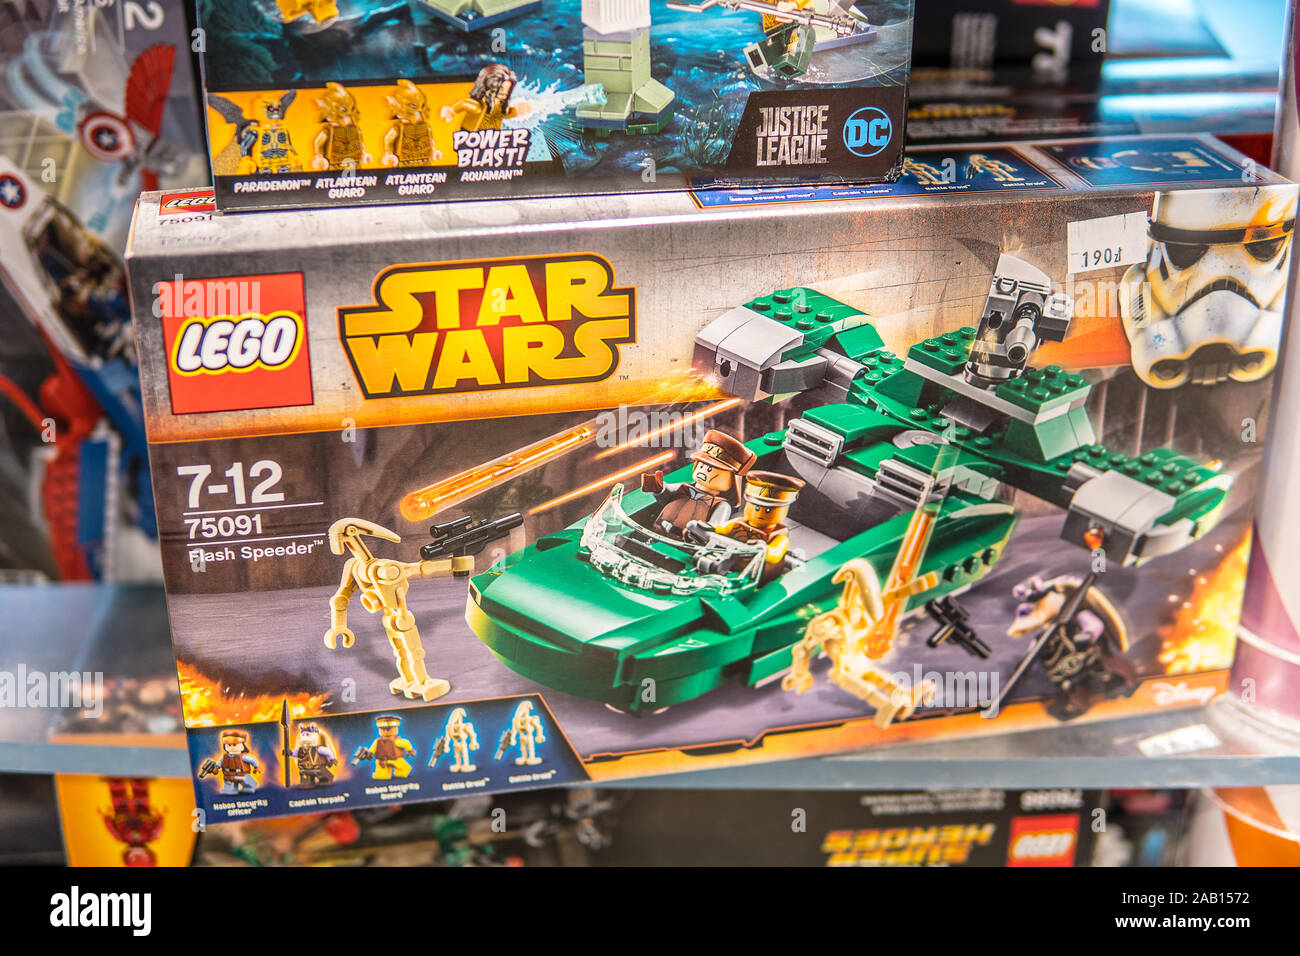 Lego Star Wars Flash Speeder, Disney, for children age 7-12, 75091, box on  the shop display for sale Stock Photo - Alamy